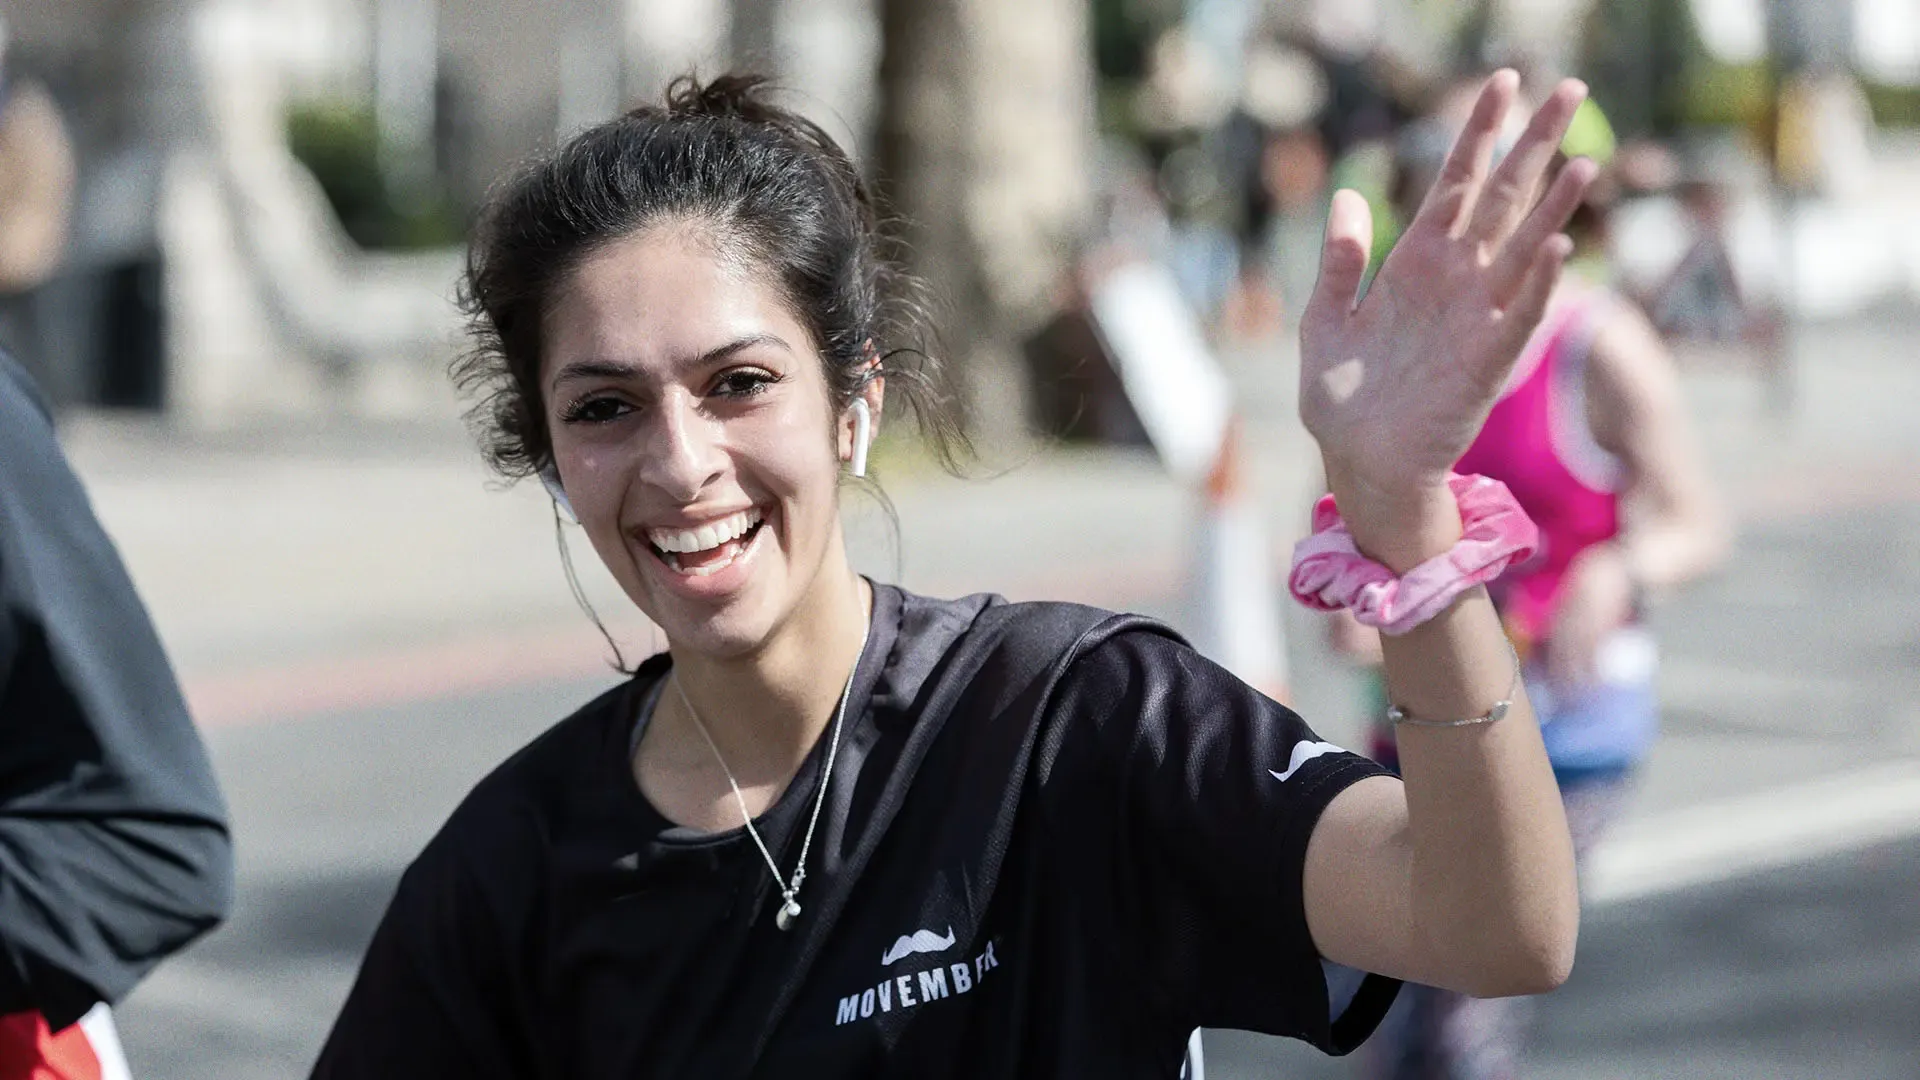 Athletic young woman participating in a marathon, smiling and waving to camera.